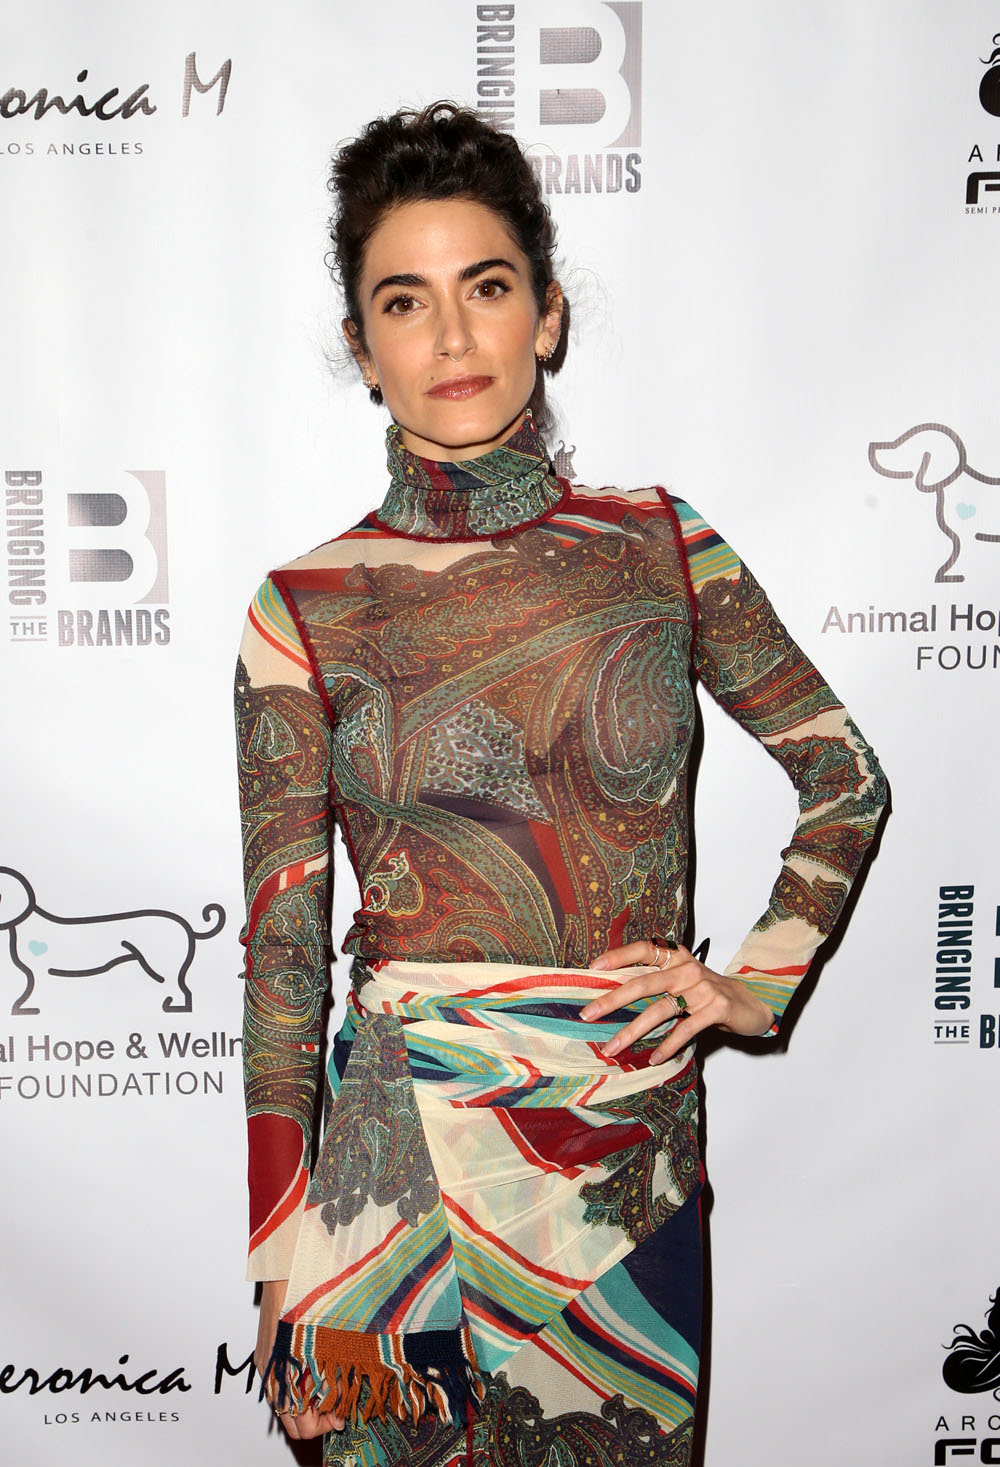 The Animal Hope & Wellness Foundation's 2nd Annual Compassion Gala